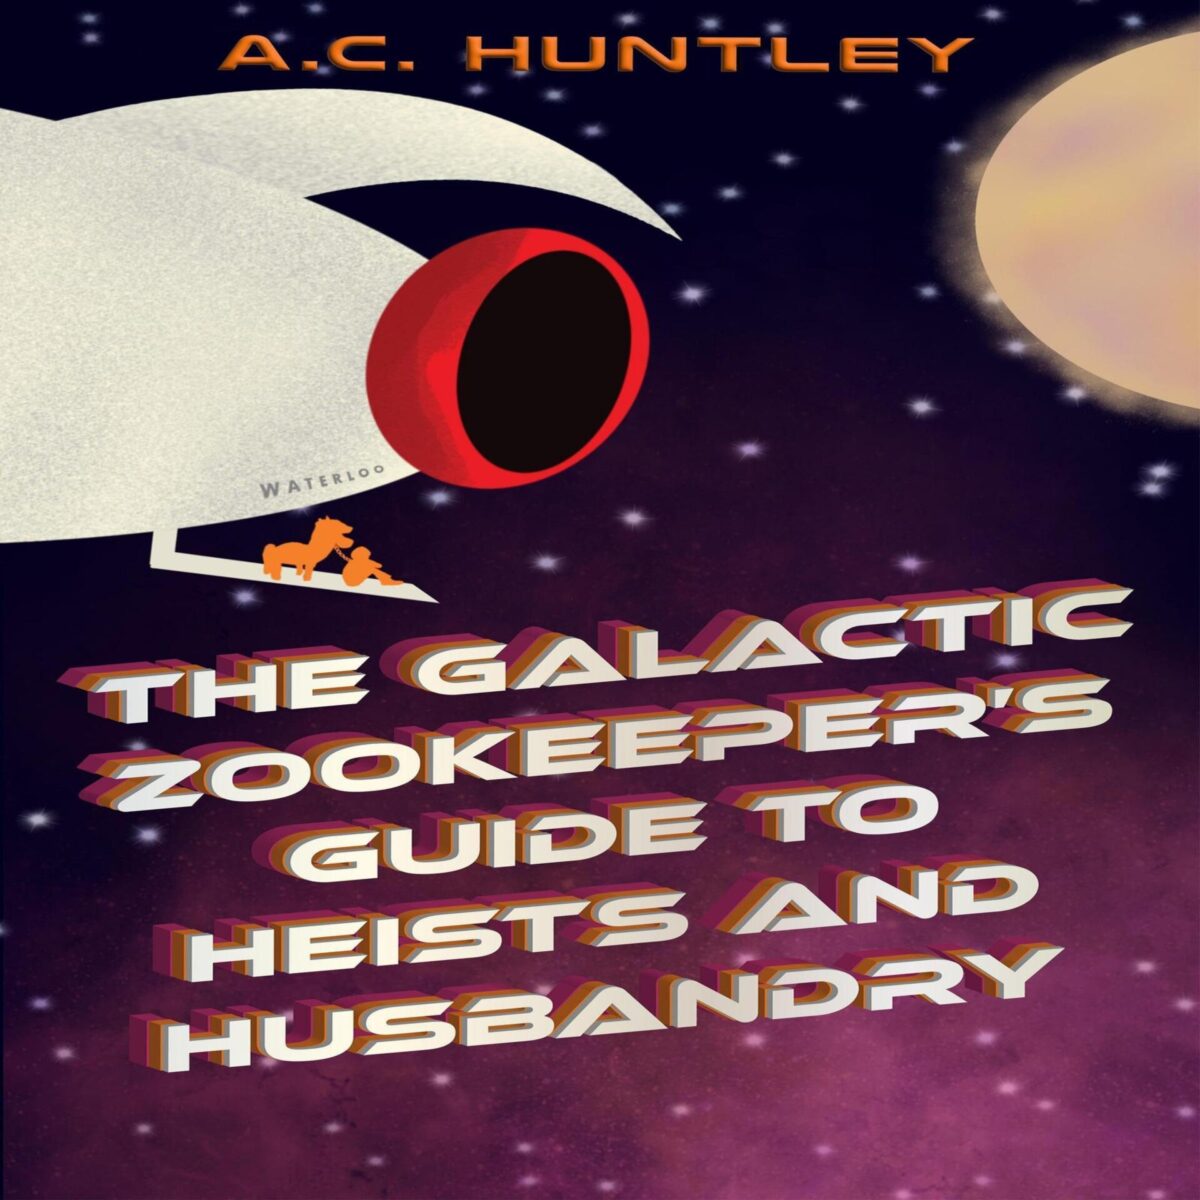 The Galactic Zookeeper's Guide To Heists And Husbandry